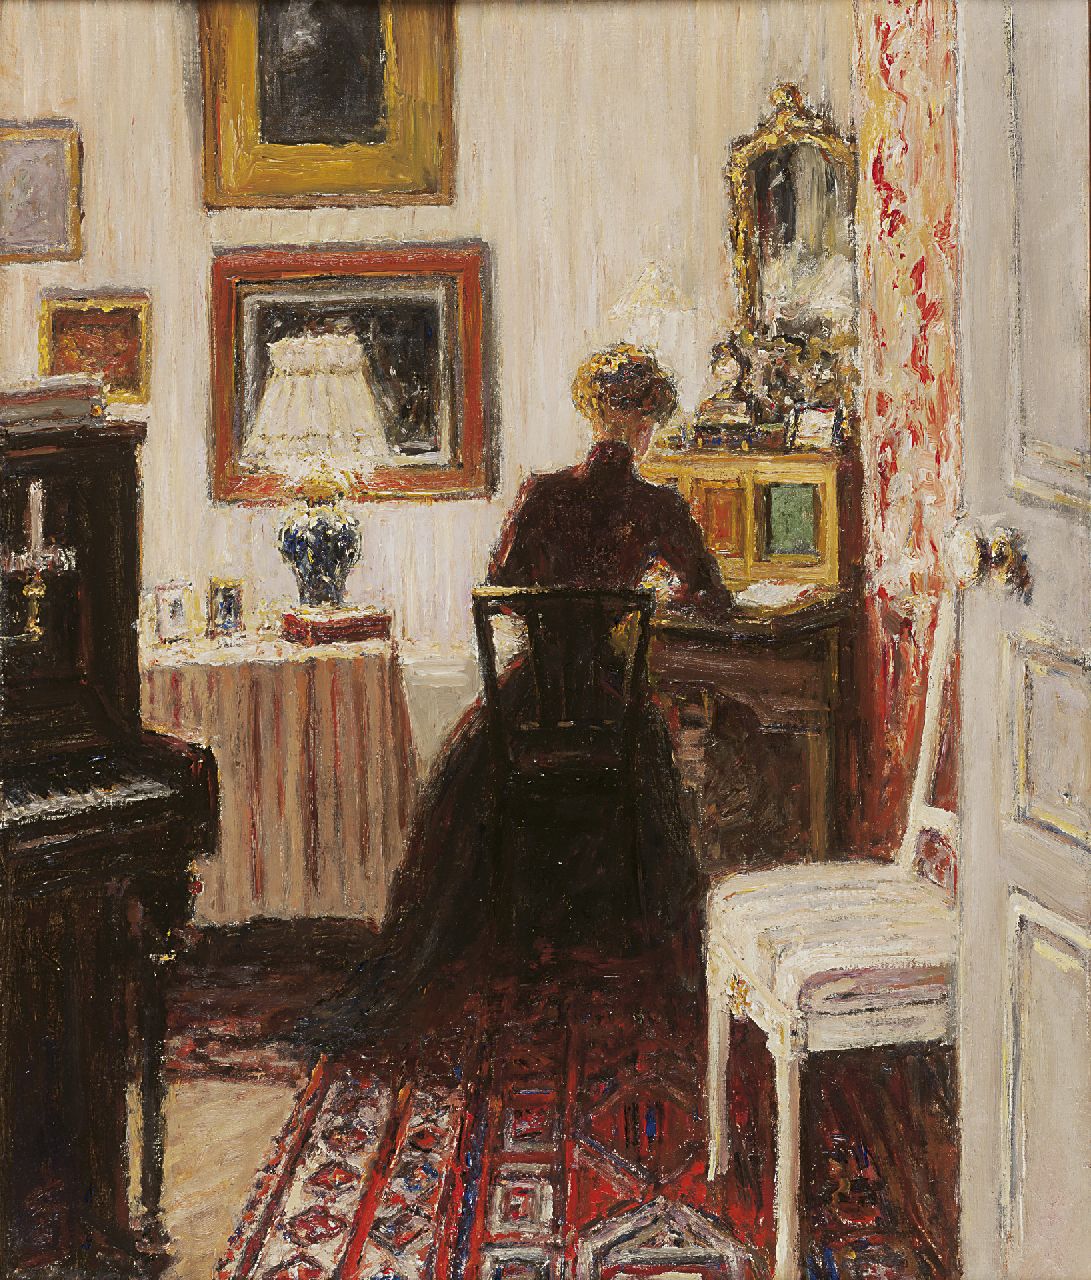 Storm van 's-Gravesande C.N.  | Carel Nicolaas Storm van 's-Gravesande, Interior with Lily Clifford, Paris, oil on painter's board 54.9 x 45.9 cm, signed l.l. with monogram and dated Nov. 5th 1907 on the reverse